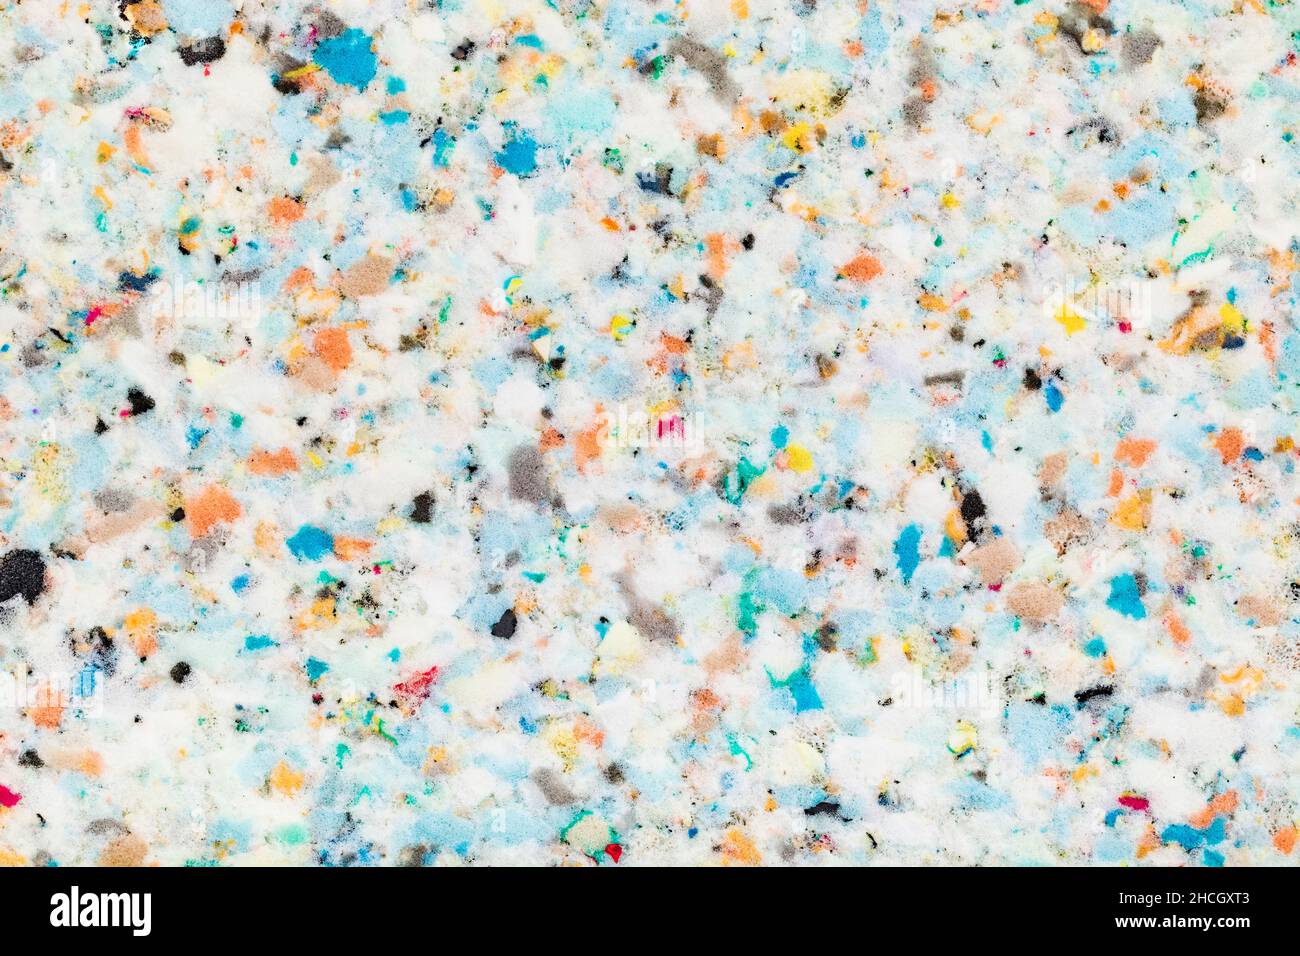 Section of high density foam rubber used in upholstery. Also for confusion, mental illness, the mind, shattered dreams, lack of clarity.. Stock Photo